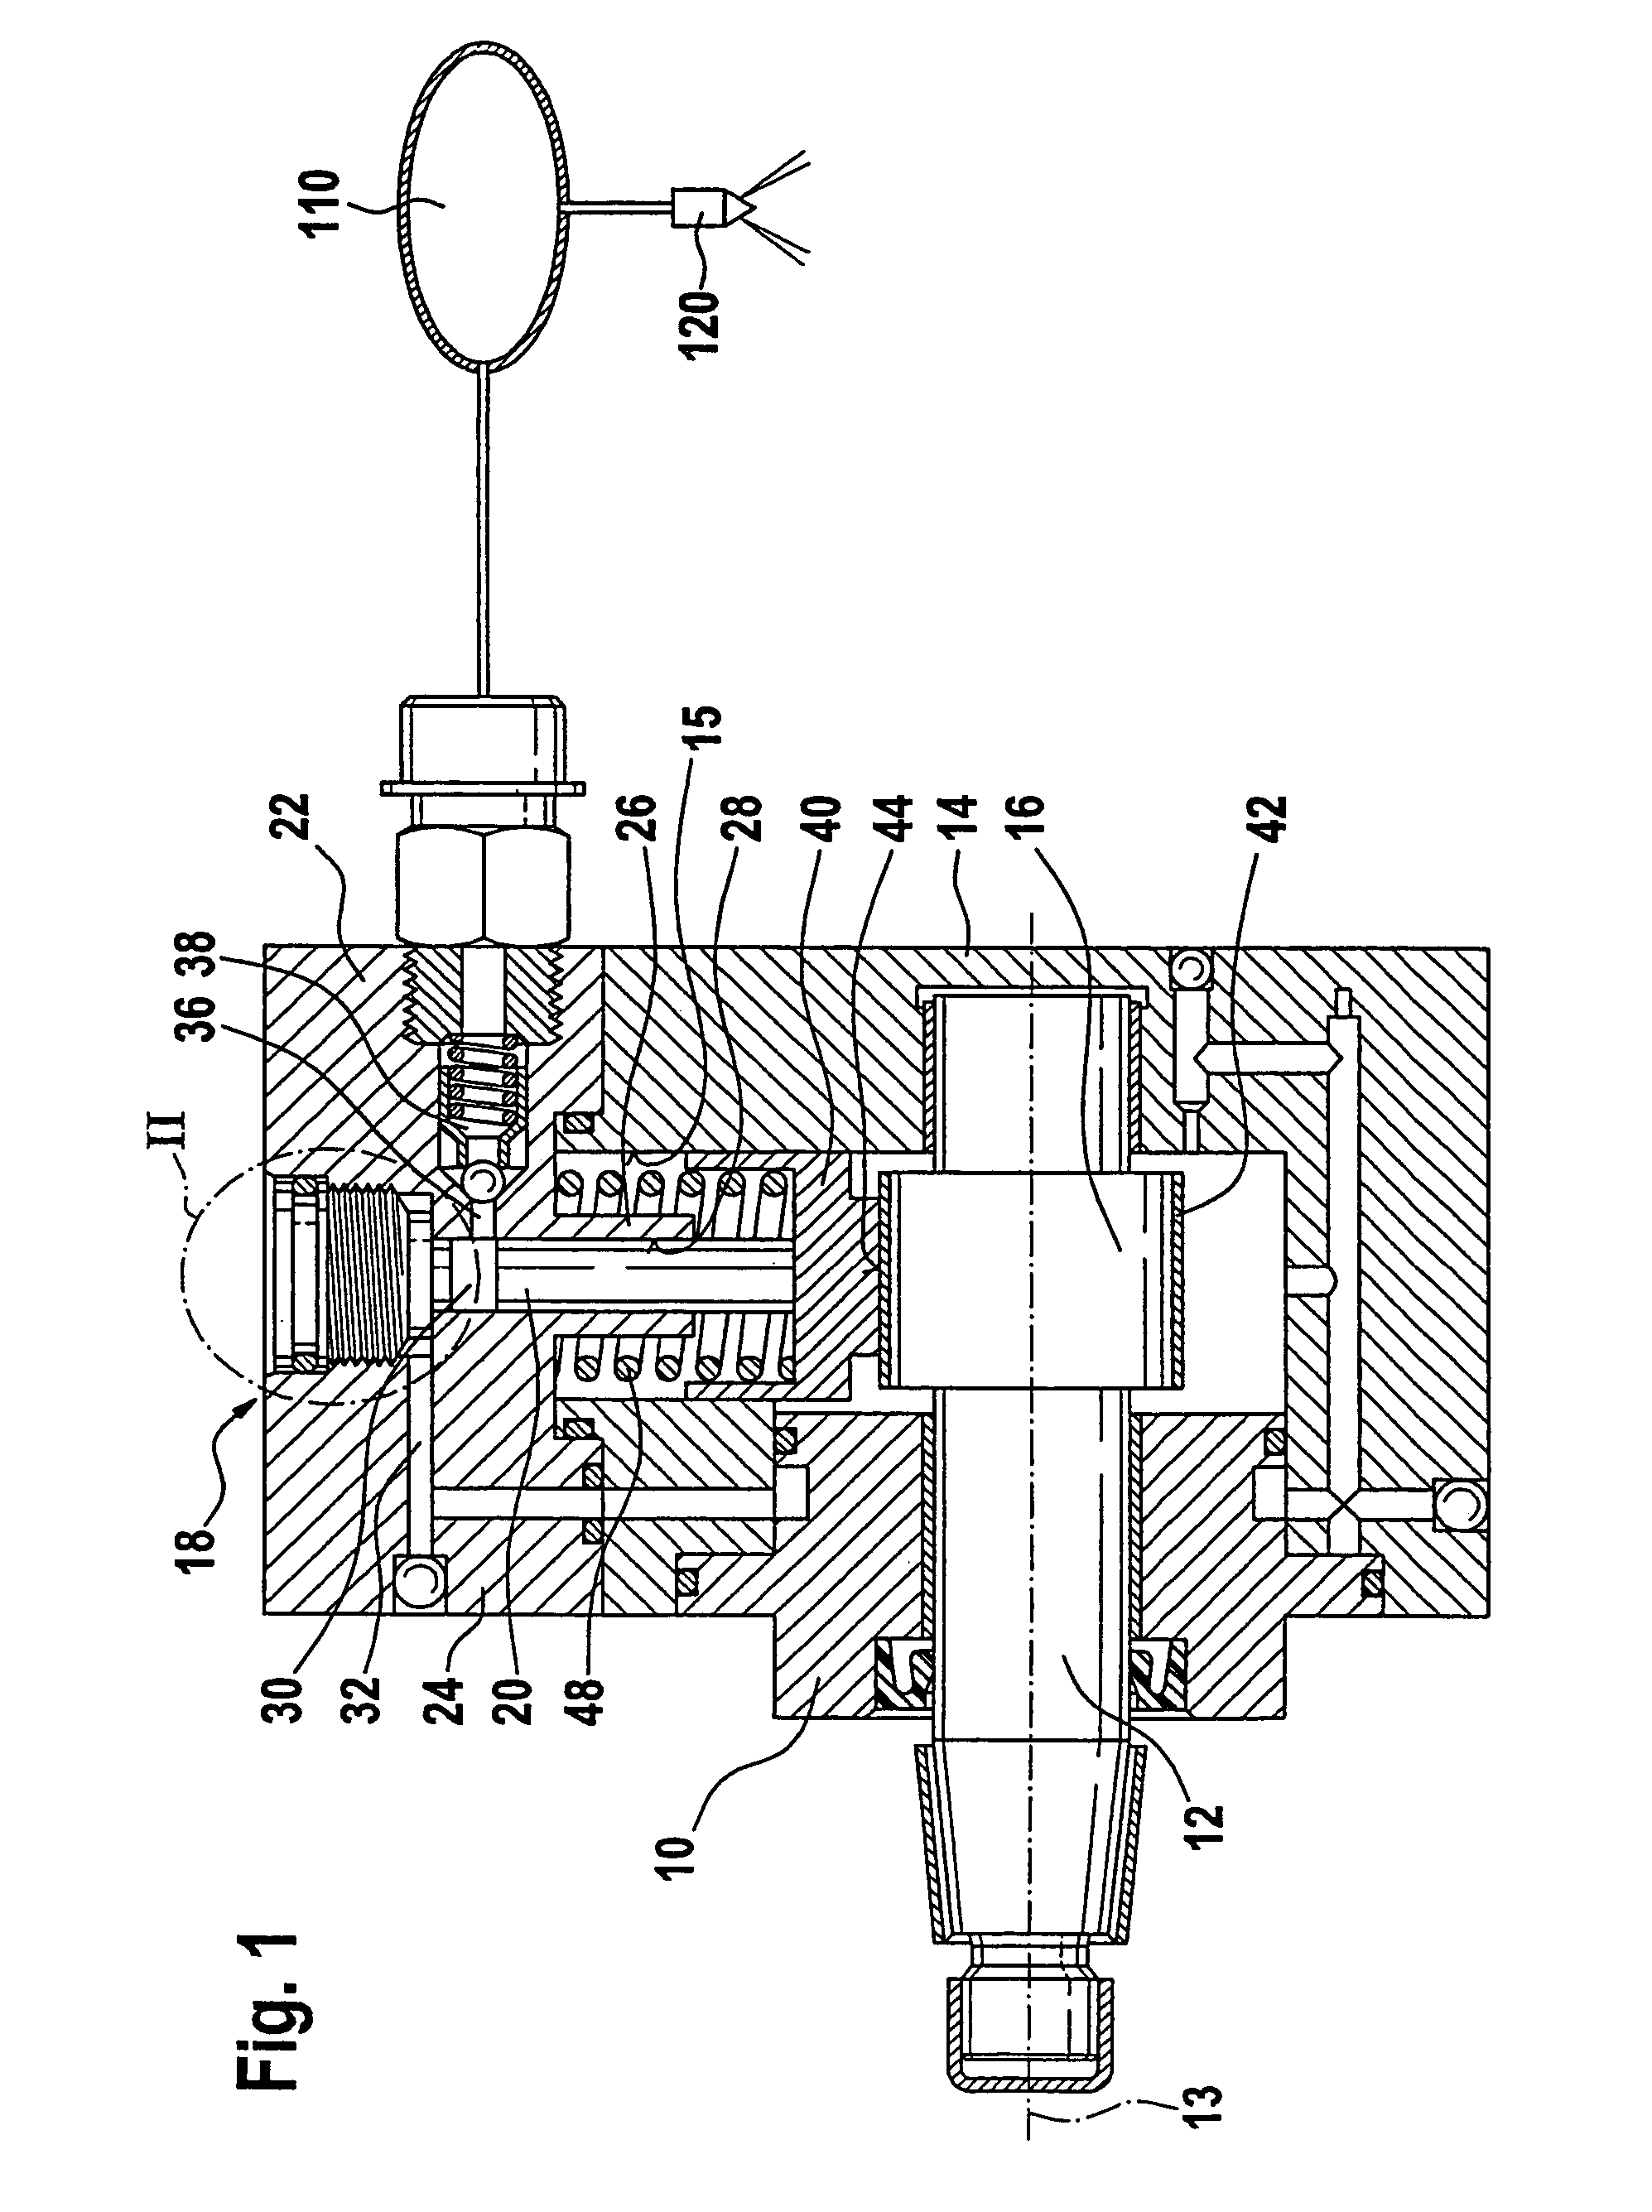 High-pressure pump for a fuel injection system of an internal combustion engine